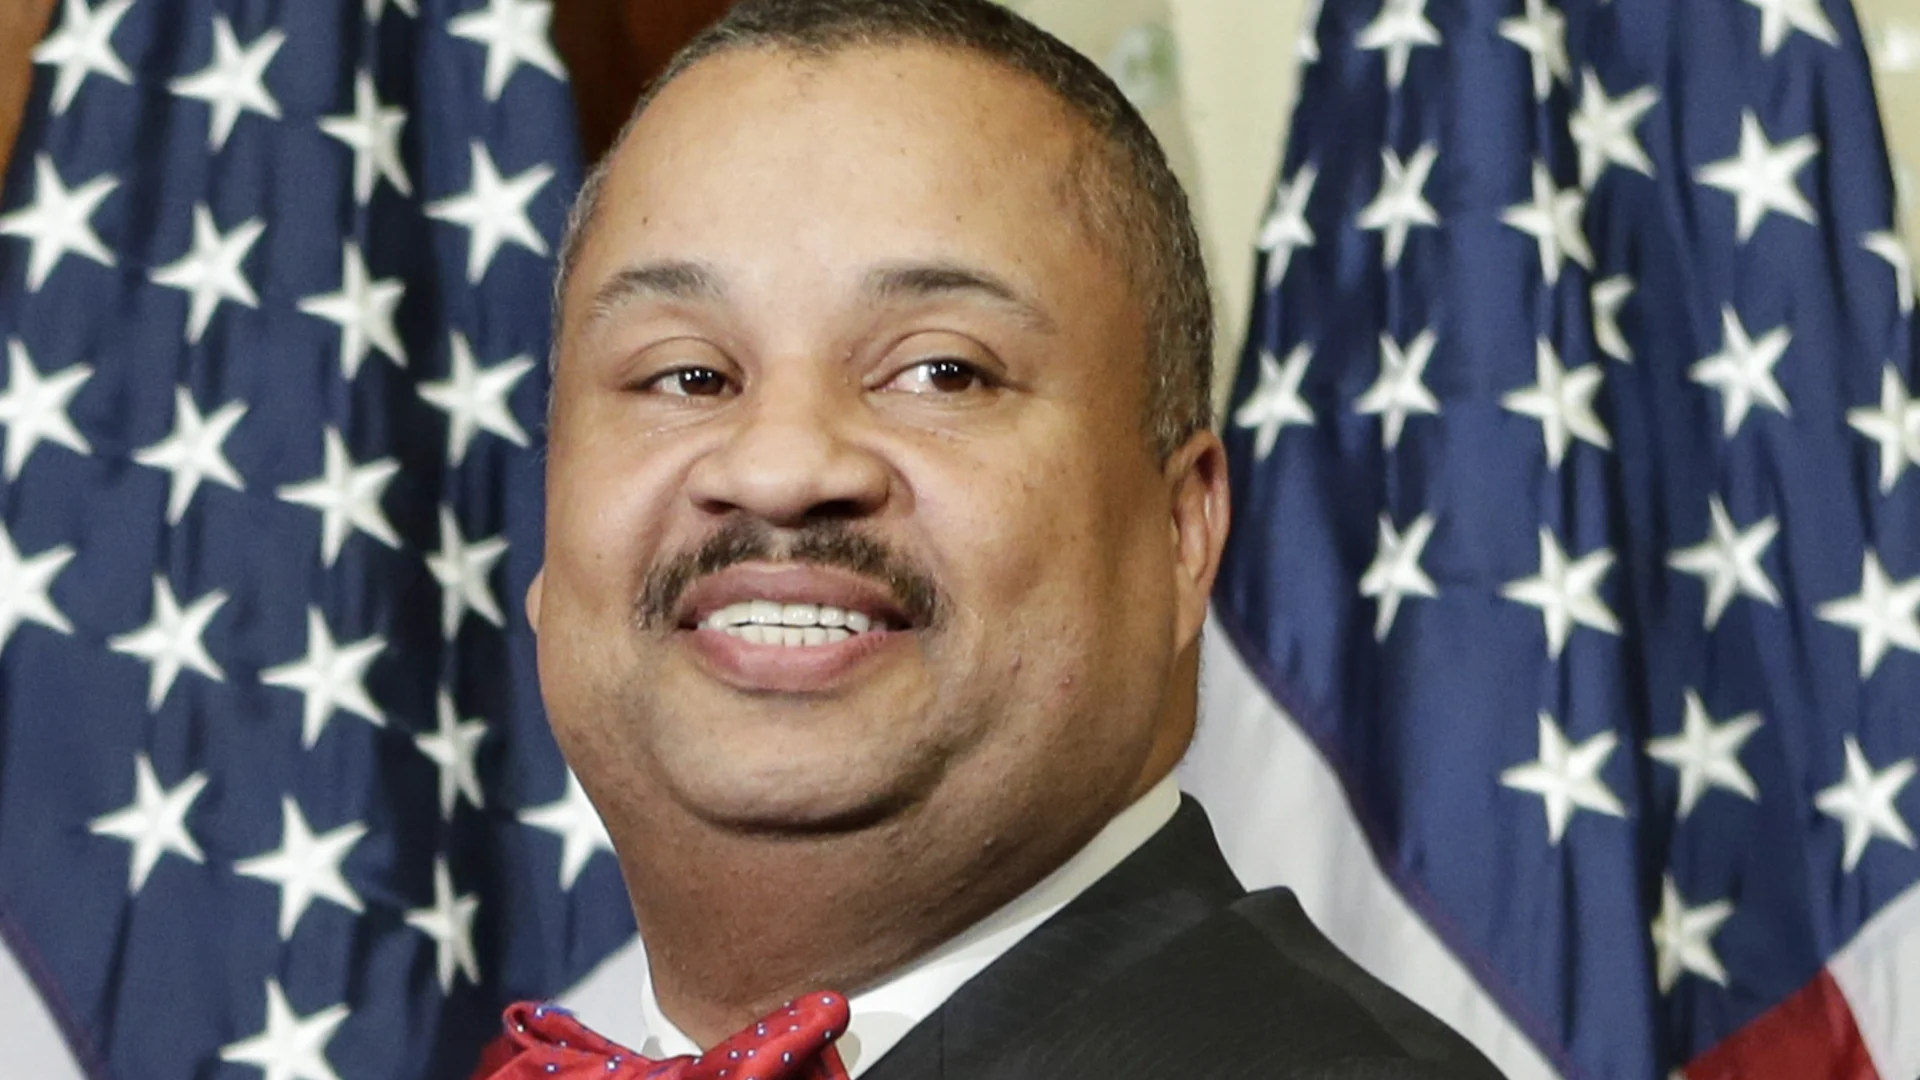 Special election to be held to fill late Rep. Donald Payne’s seat in Congress